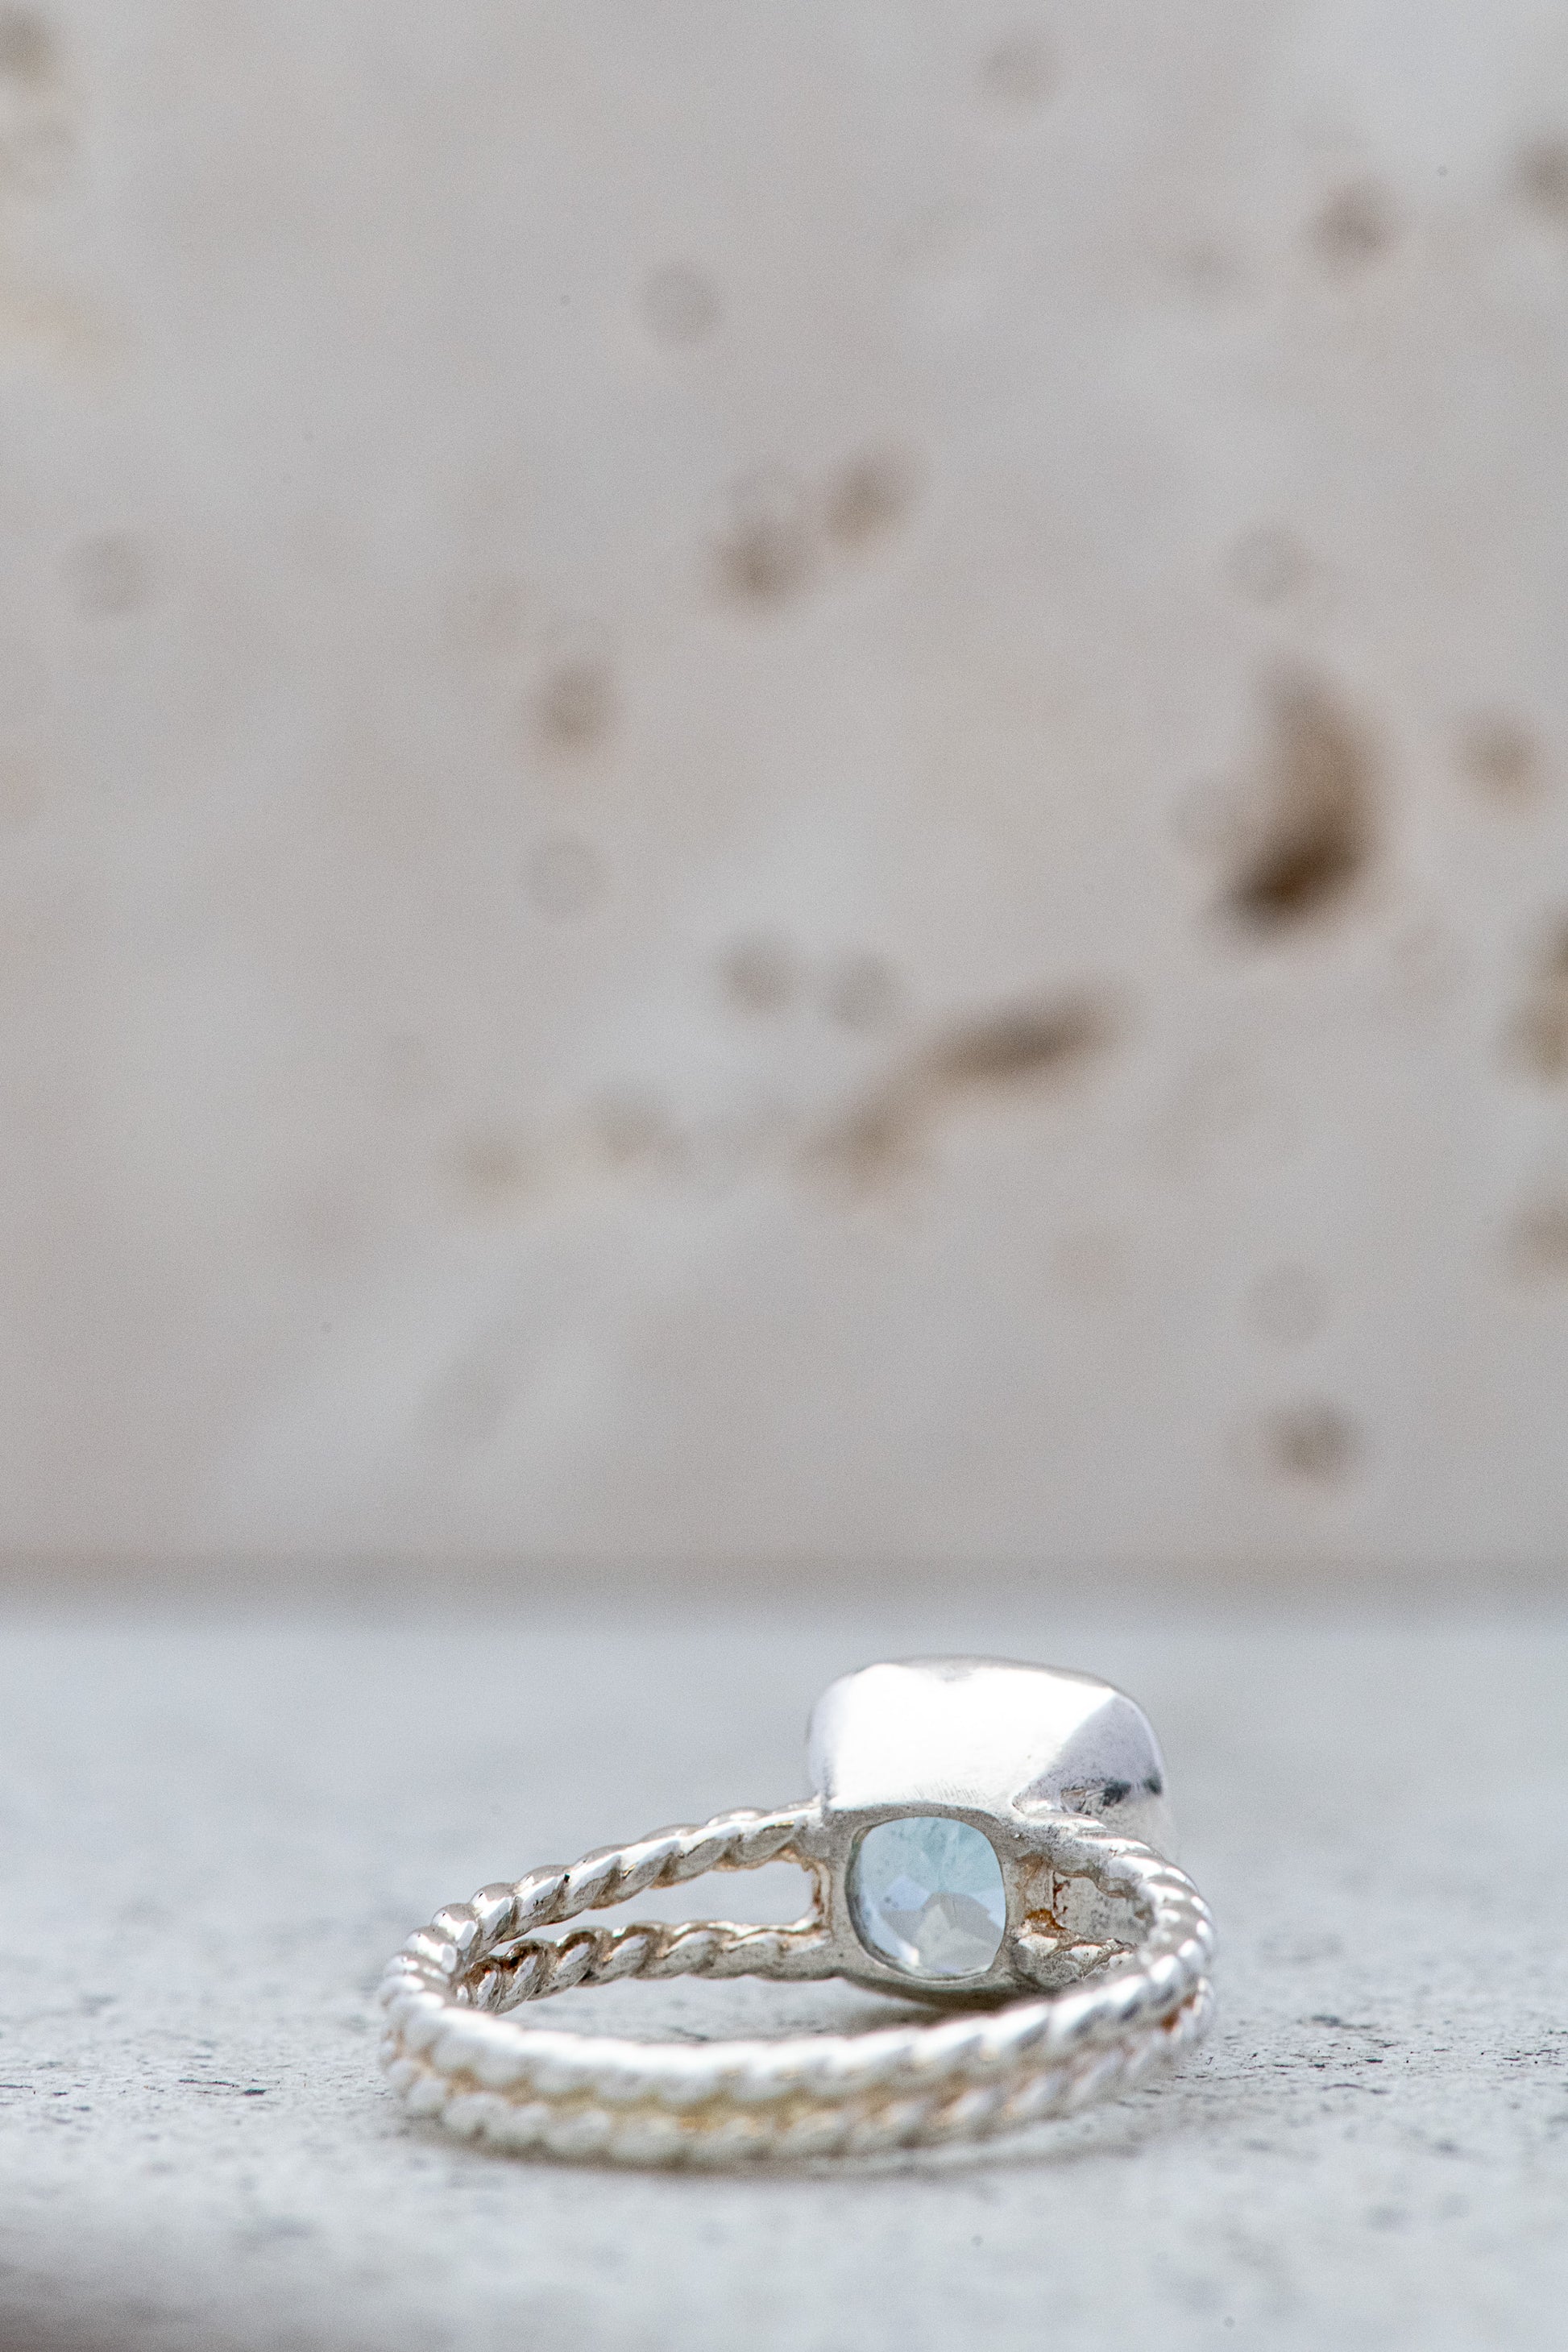 A handmade Rope Band Ring with blue labradorite stone.